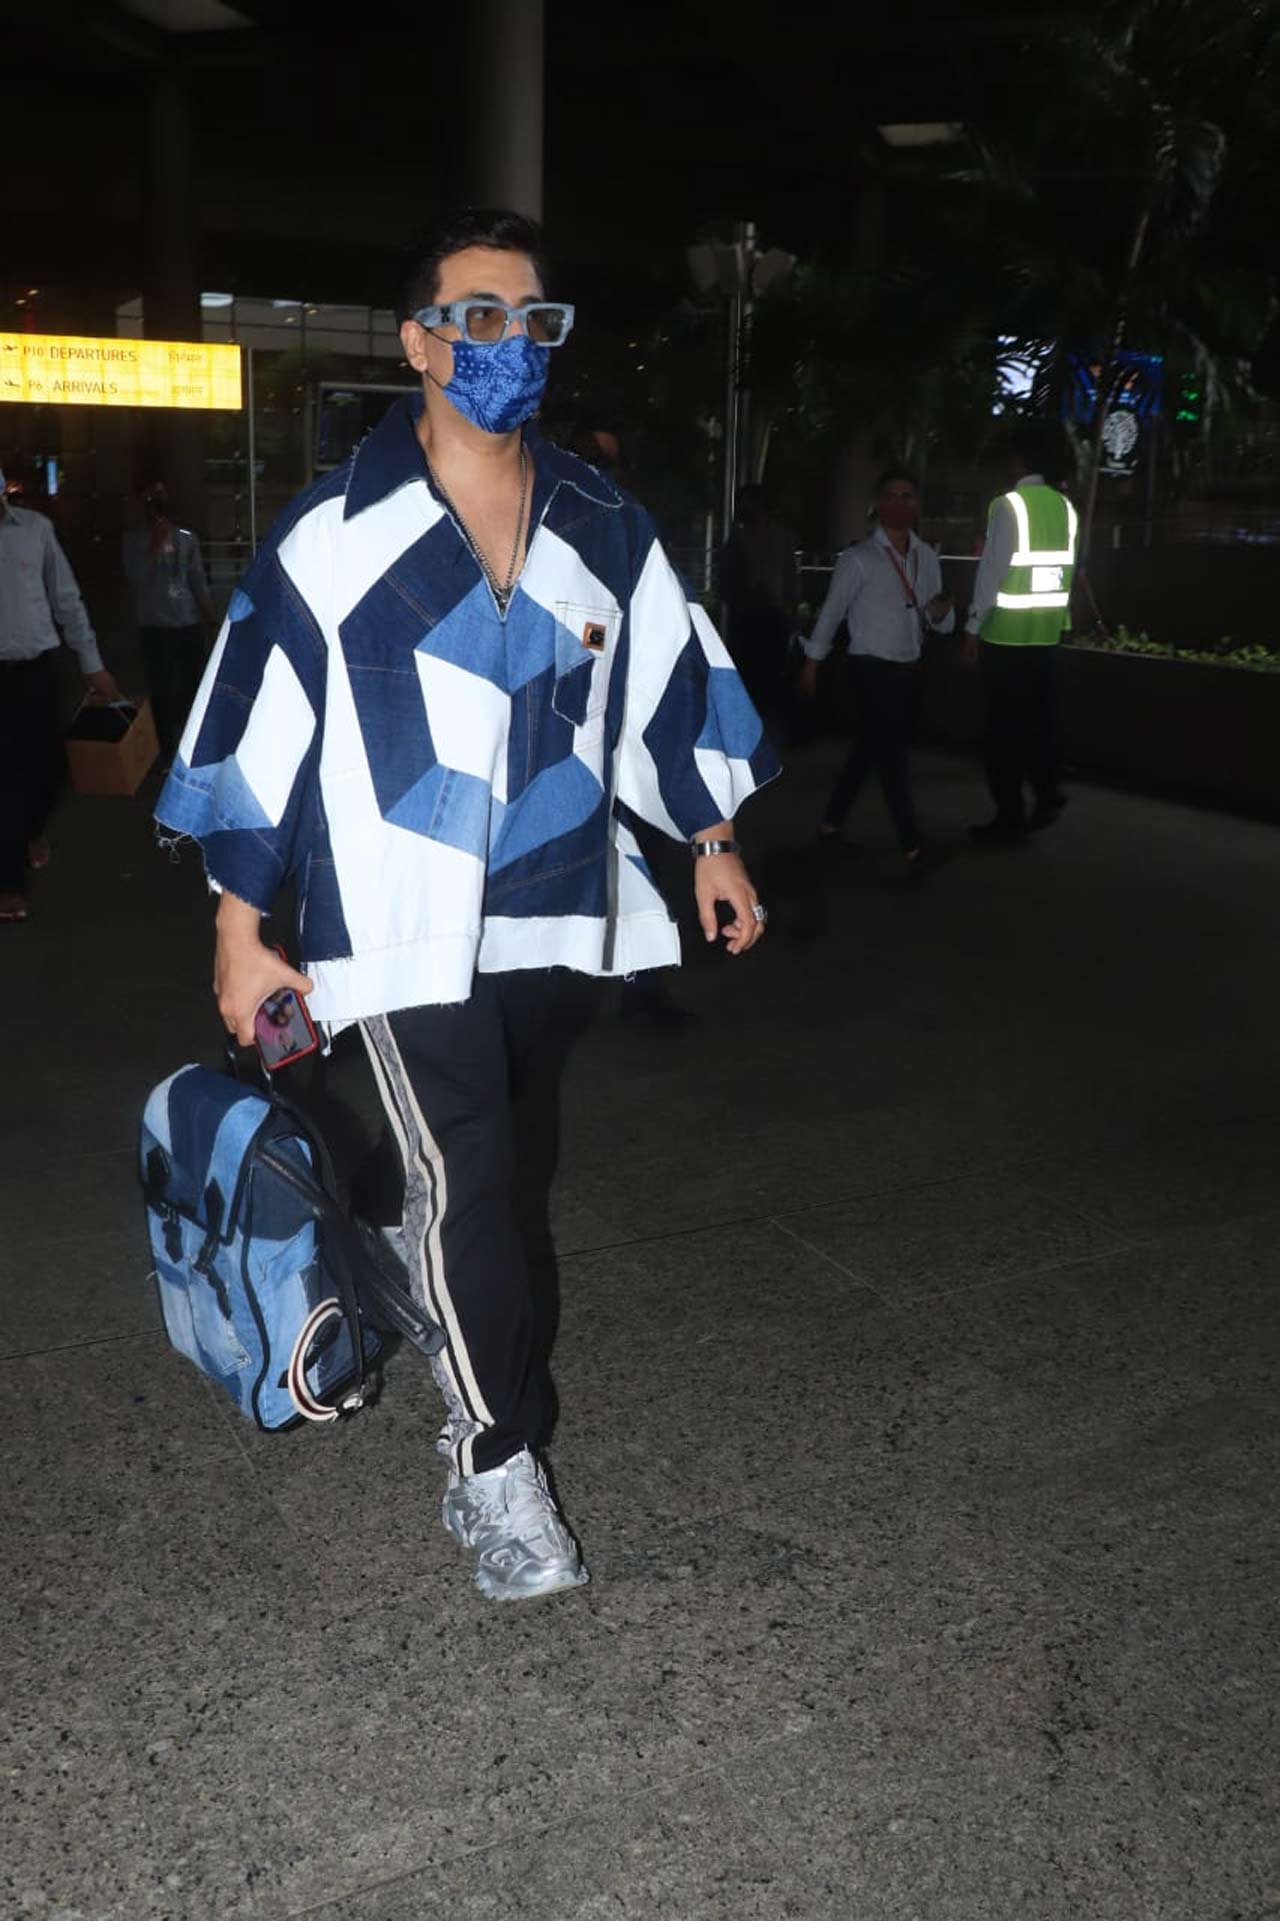 Karan Johar showed off his quirky fashion was clicked at the Mumbai airport. The popular director opted for an oversized block-coloured jacket, paired with a black basic tee and denim during the outing.